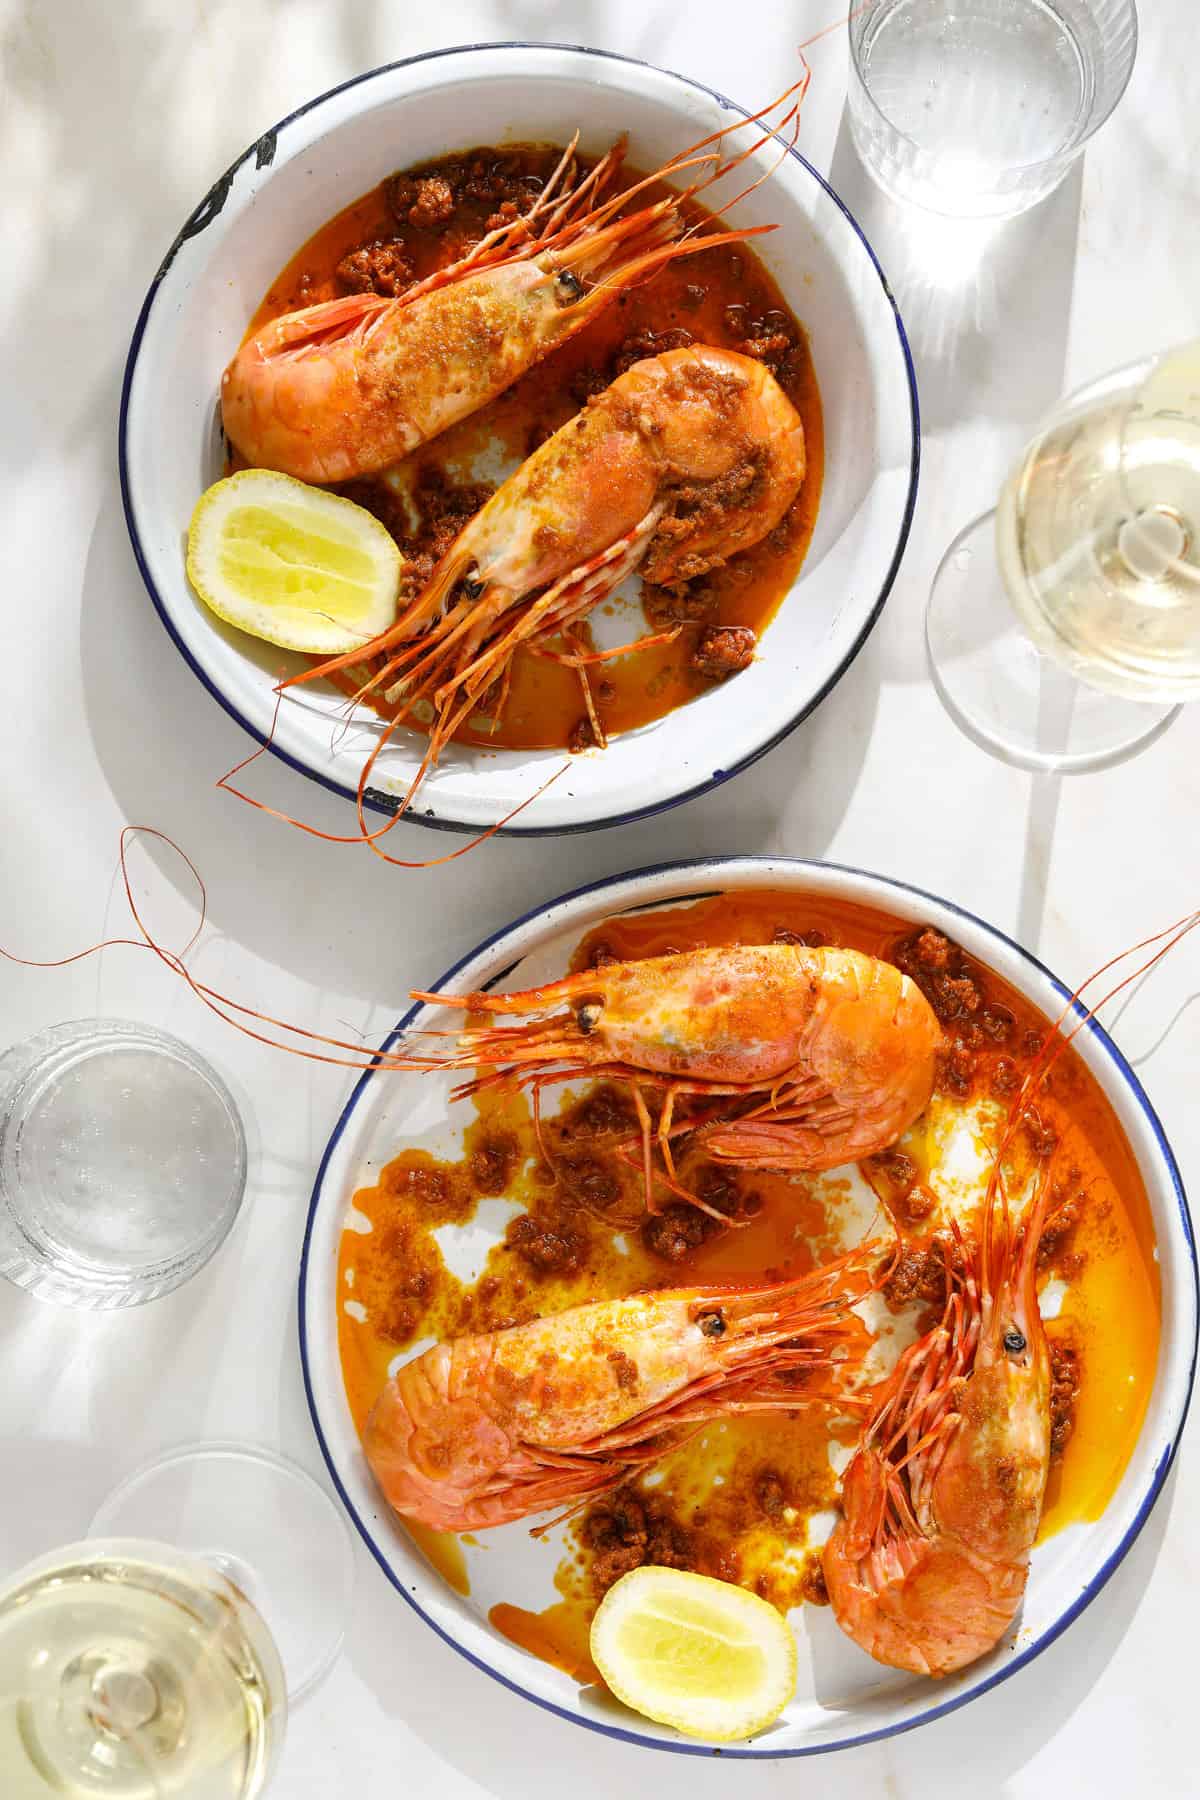 Two bowls of whole , cooked prawns with a red sauce, lemon wedges and wine glasses on the side.